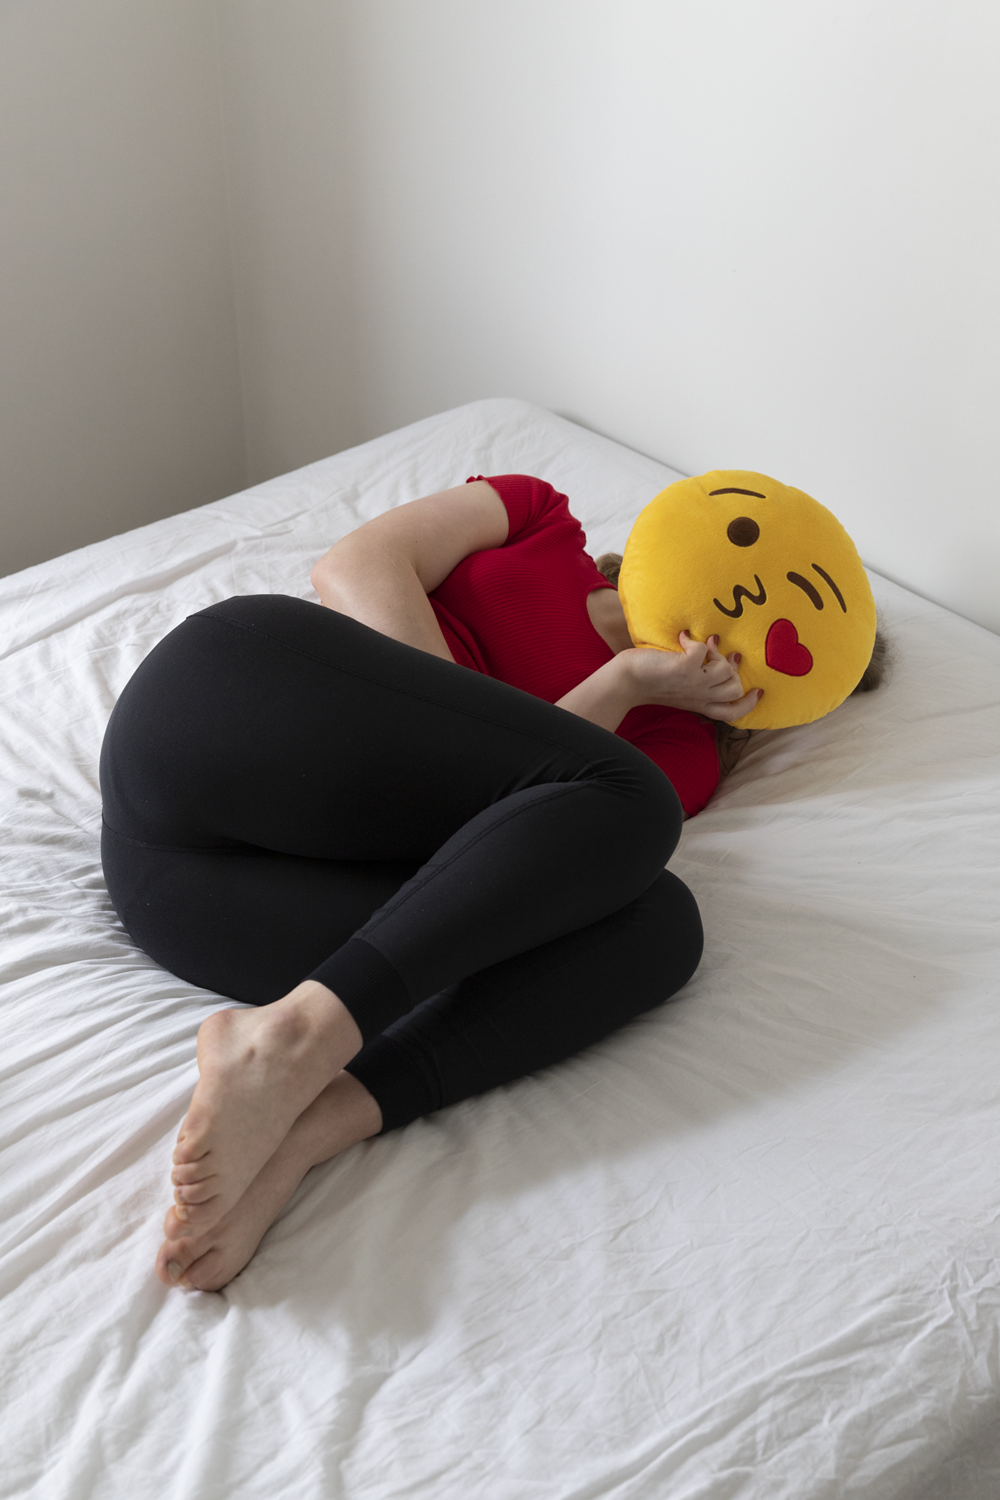 Colour photograph of female curled on empty bed with emoji pillow covering face.